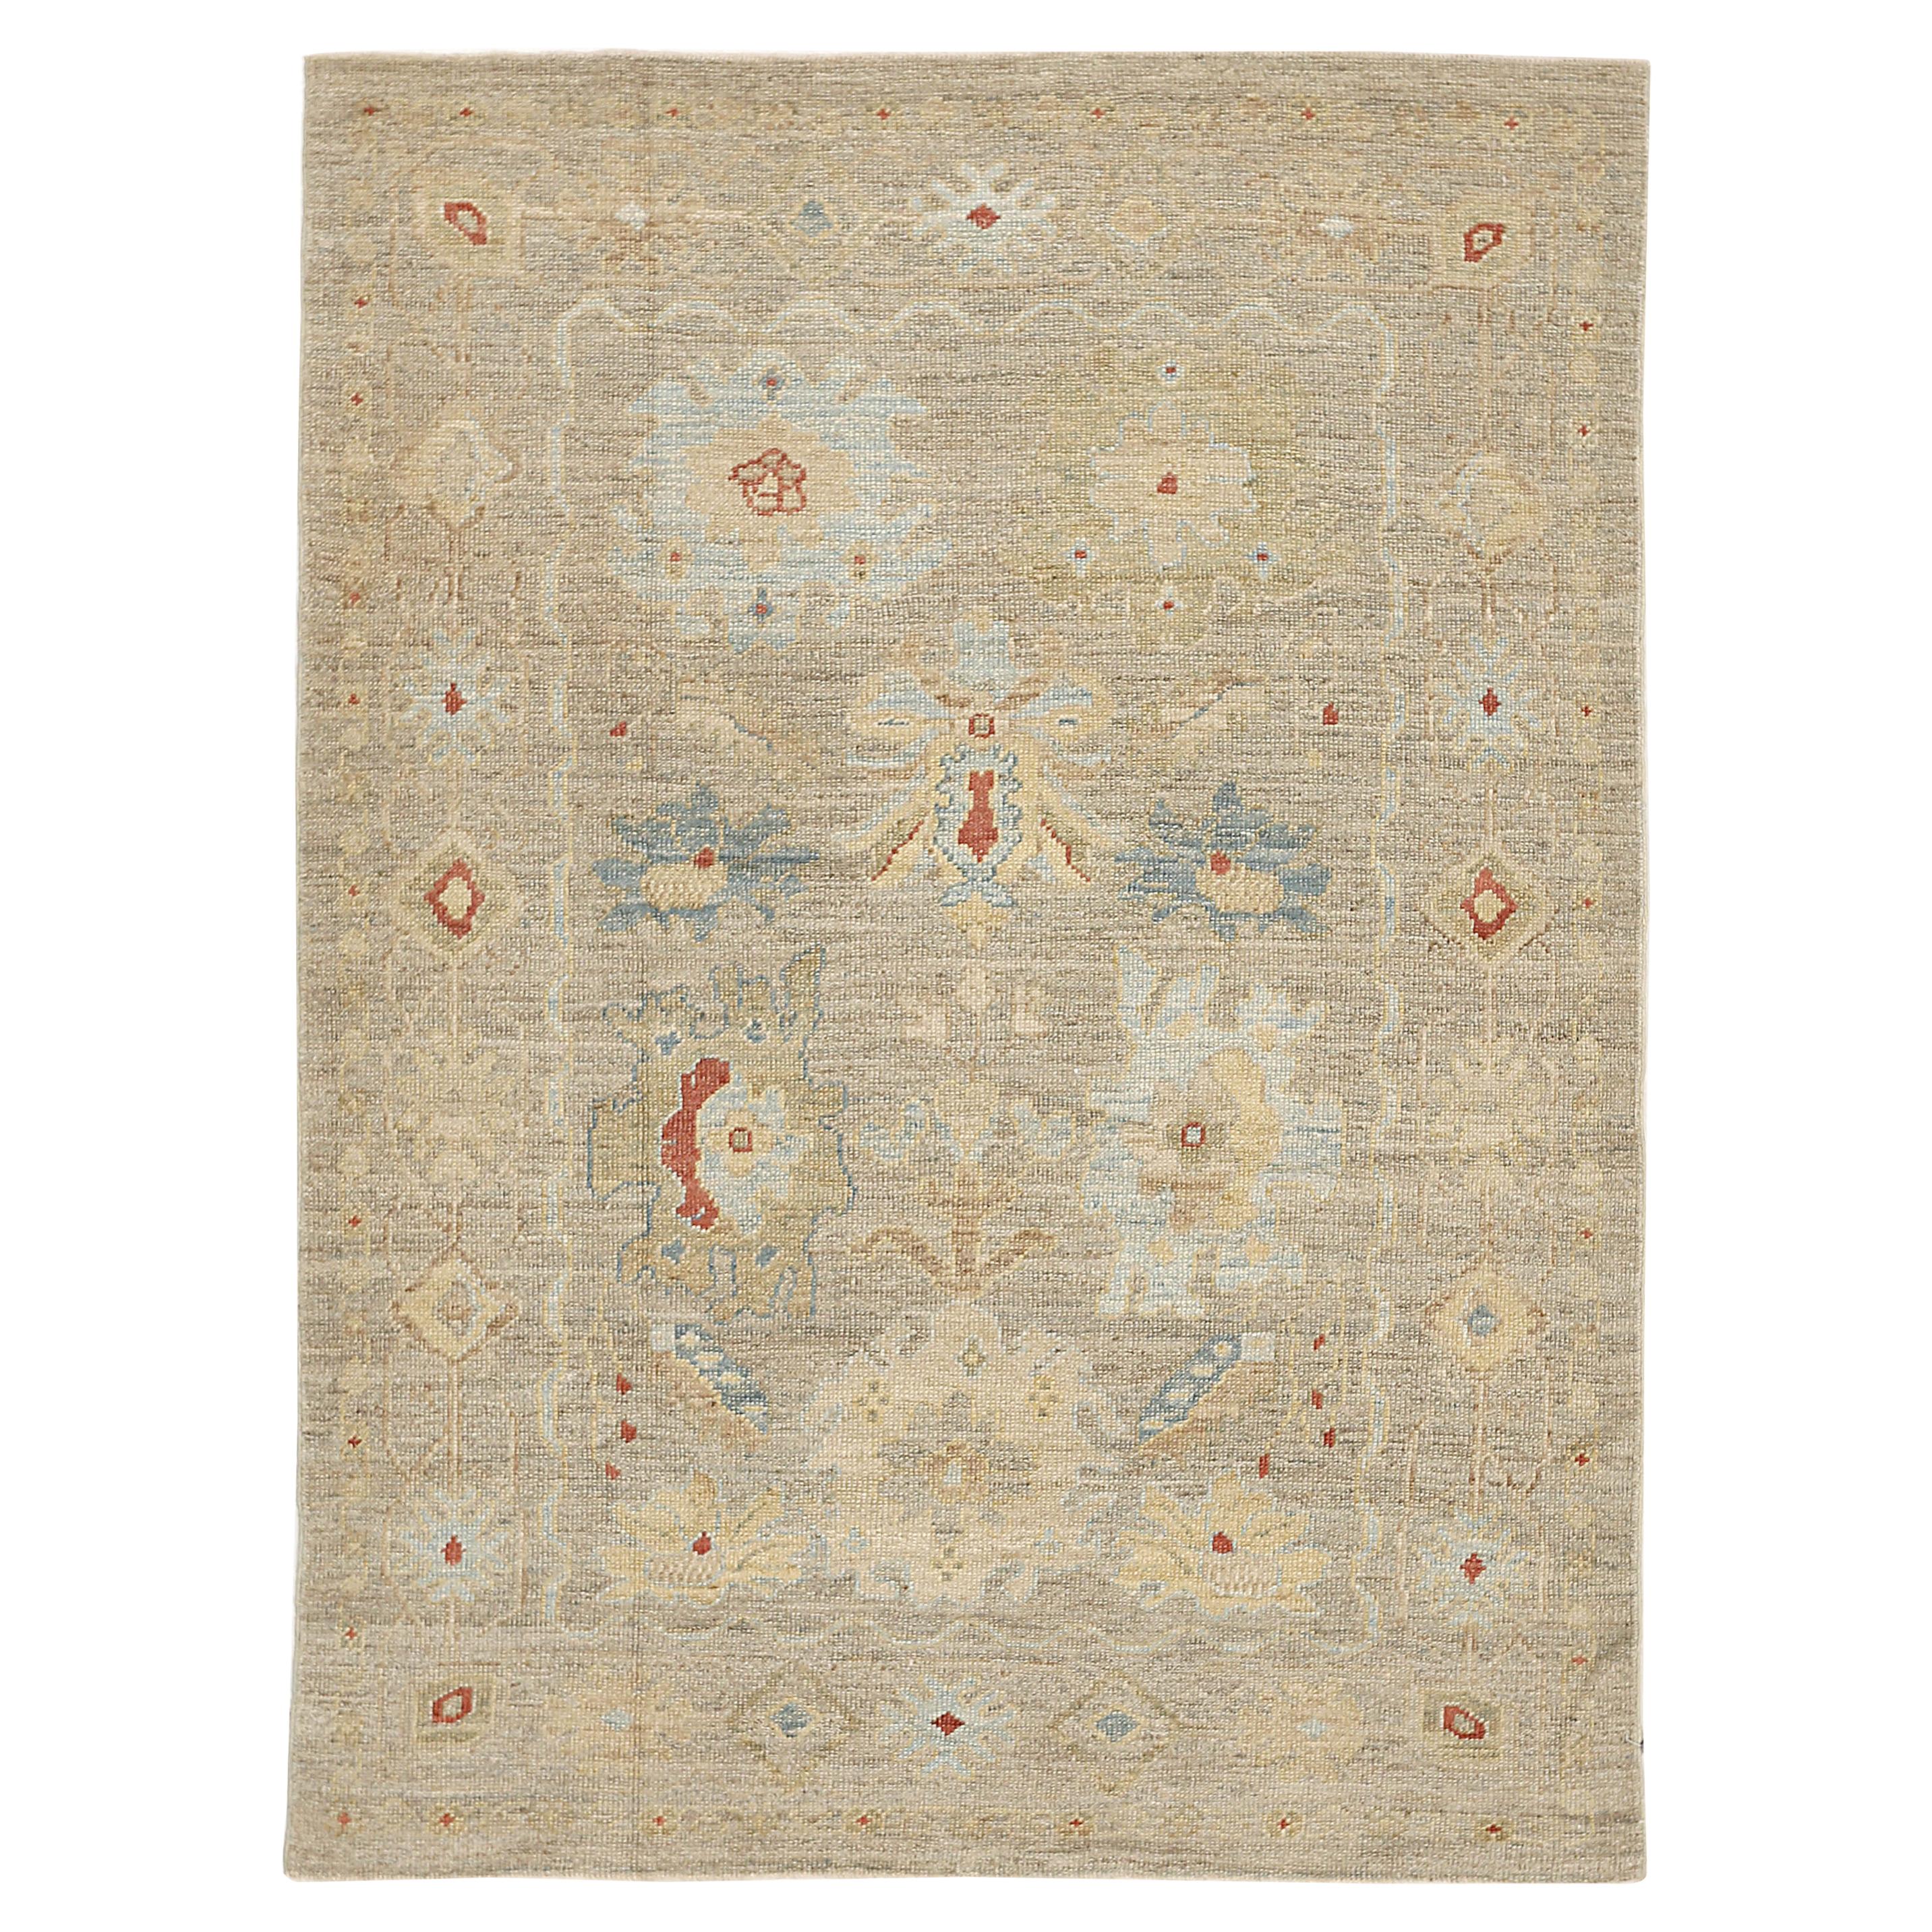 Modern Turkish Oushak Rug with Red and Blue Floral Motifs